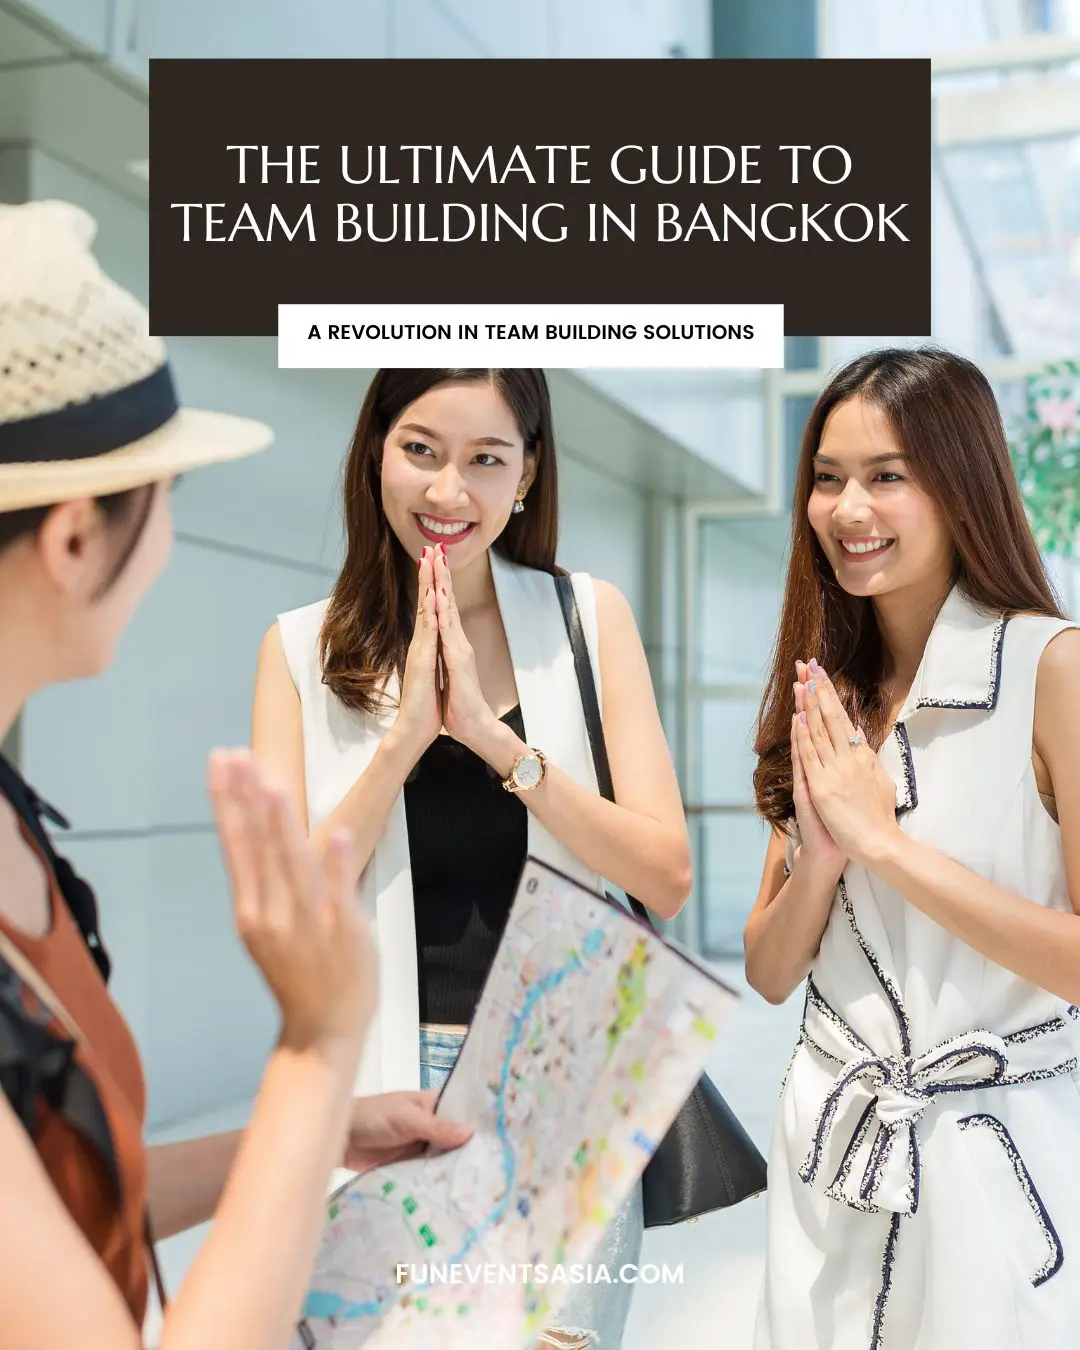 The Ultimate Guide to Team Building in Bangkok